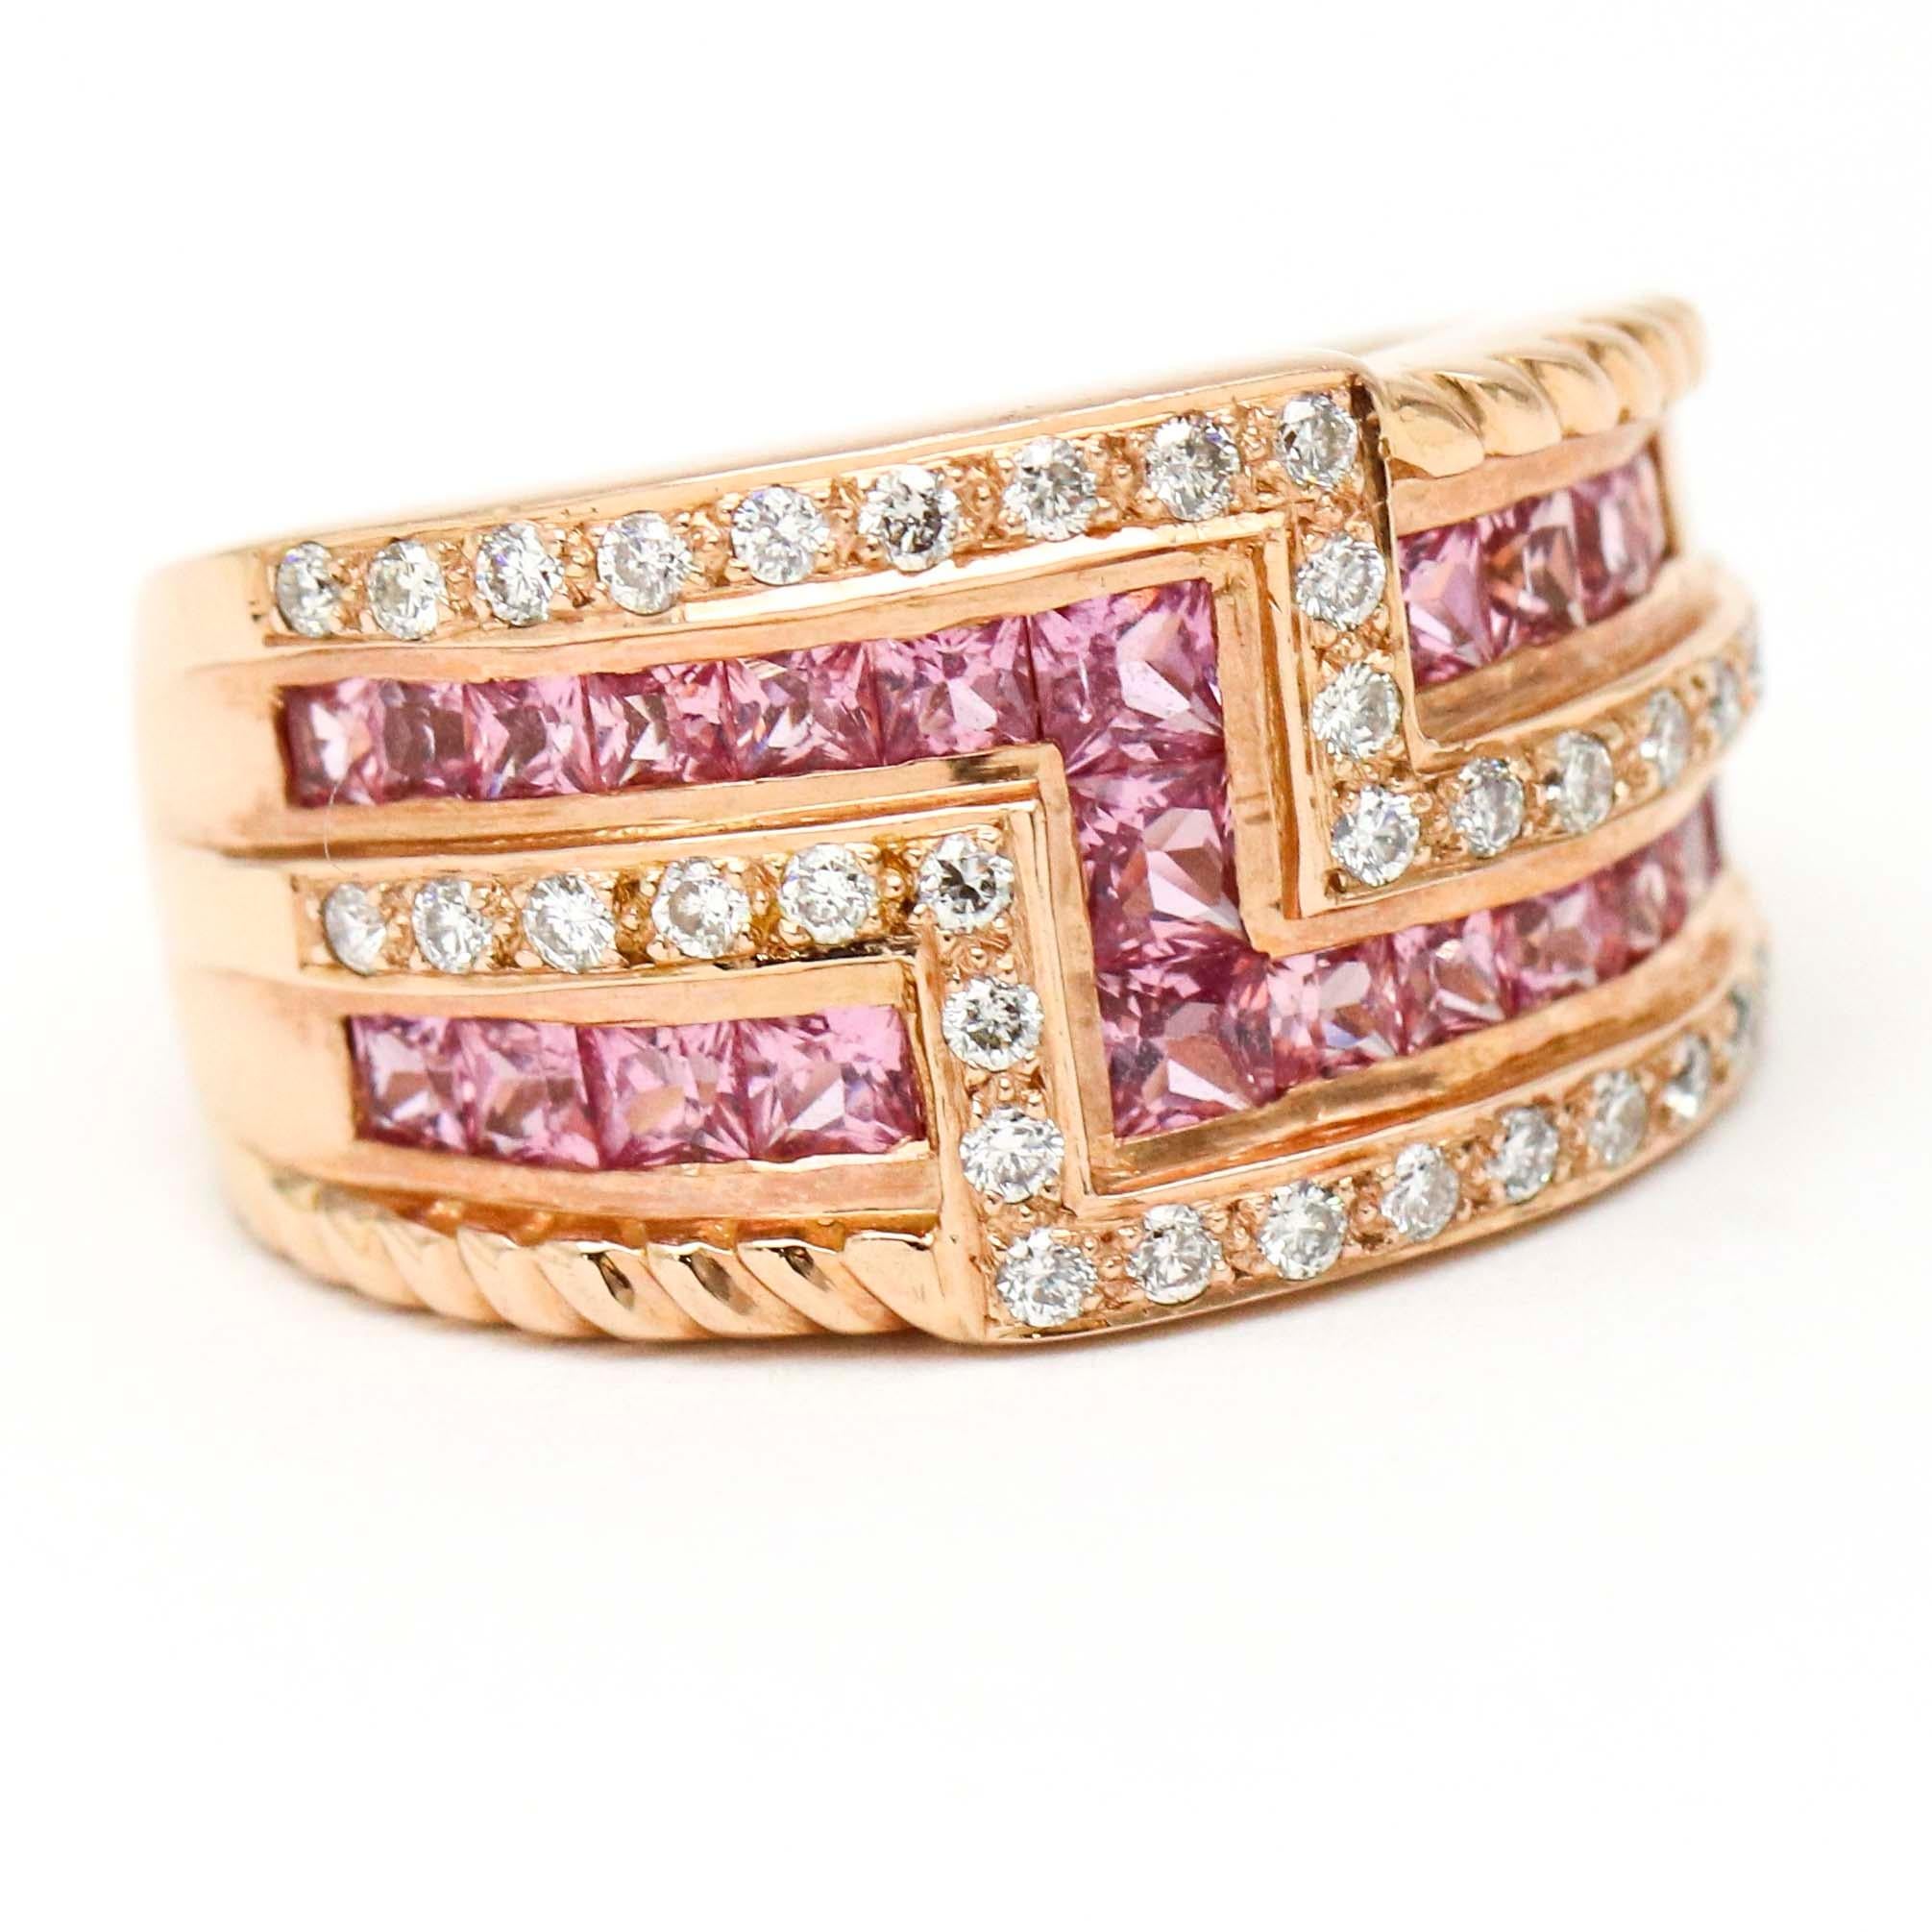 LeVian wide band in 14-karat rose gold with over pink sapphires and diamonds. Size 6.75 (can be sized)